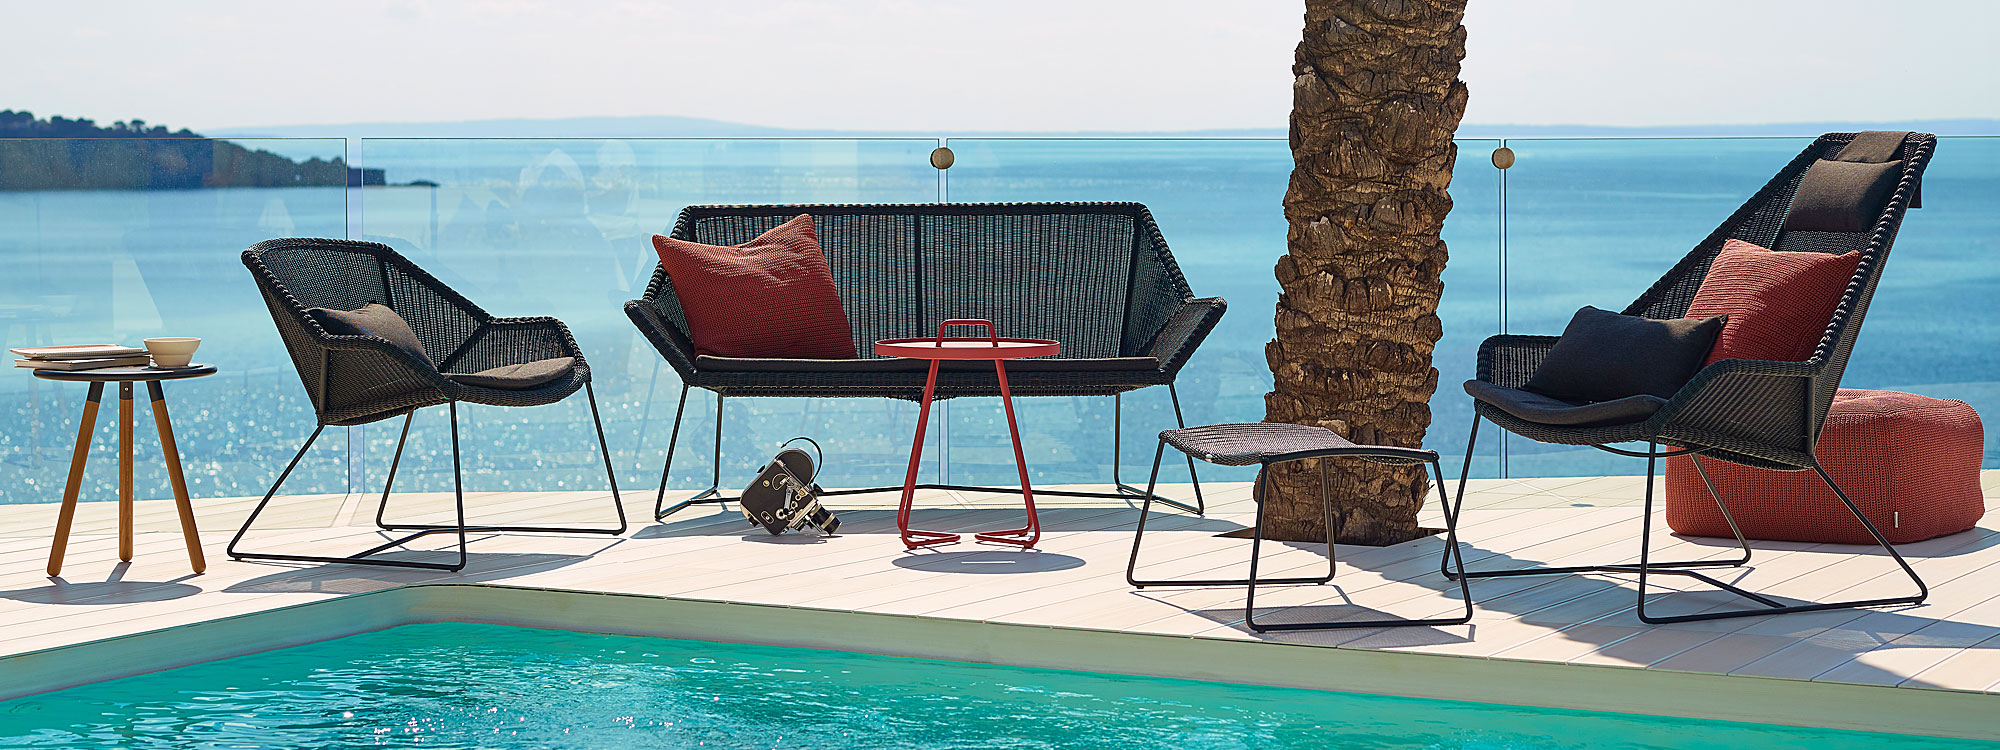 Image of Cane-line Breeze 2 seat sofa and lounge chairs in black Cane-line weave, together with On The Move outdoor side tables on poolside, with palm tree trunk to one side and sparkling sea in the background